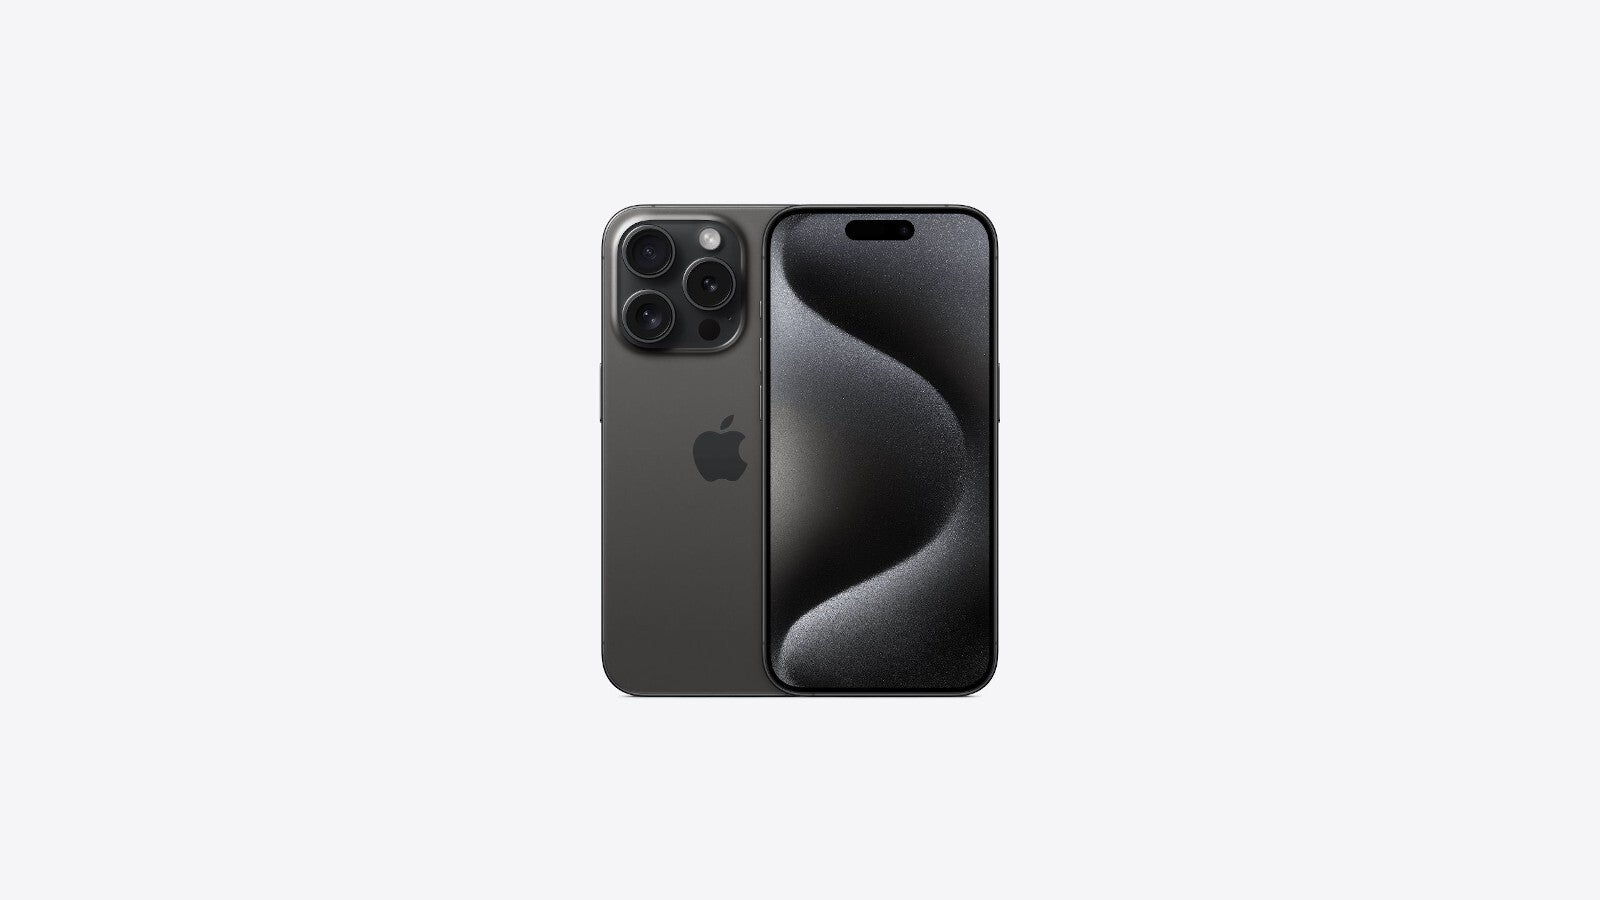 iPhone 12 Pro and Pro Max colors: all the official hues - PhoneArena